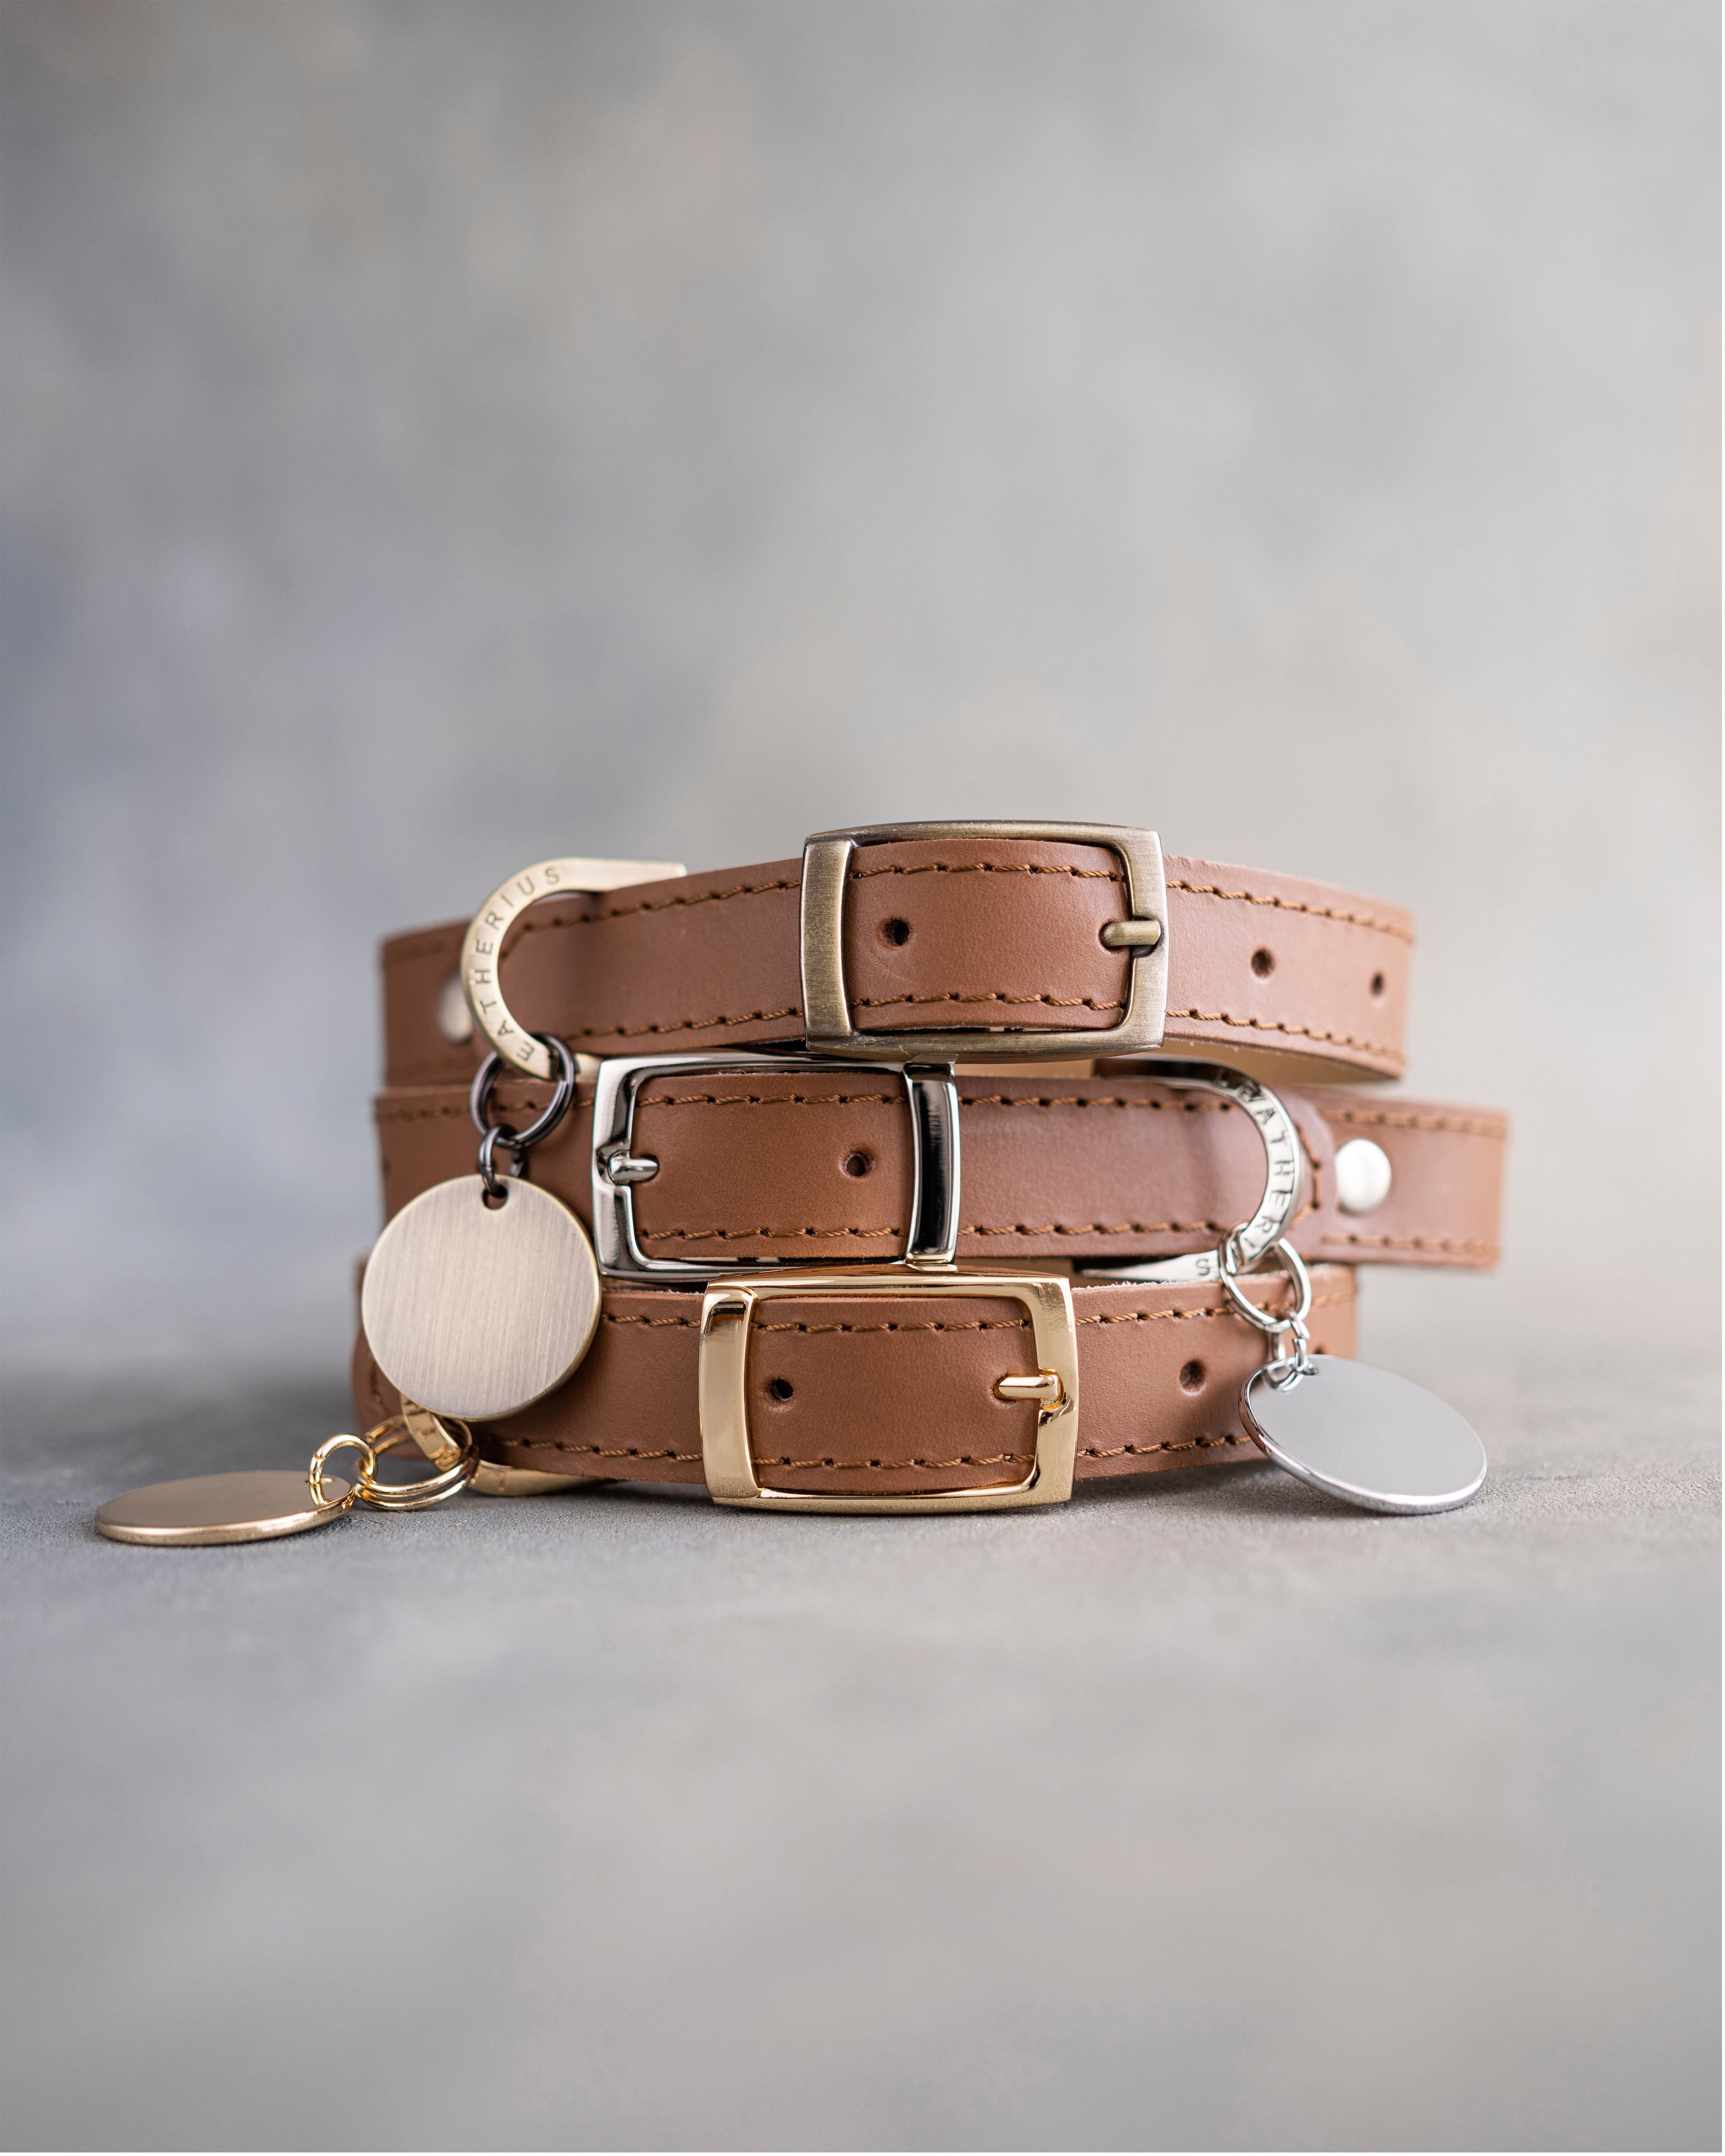 Dog Collar in Caramel leather with classy pin buckle